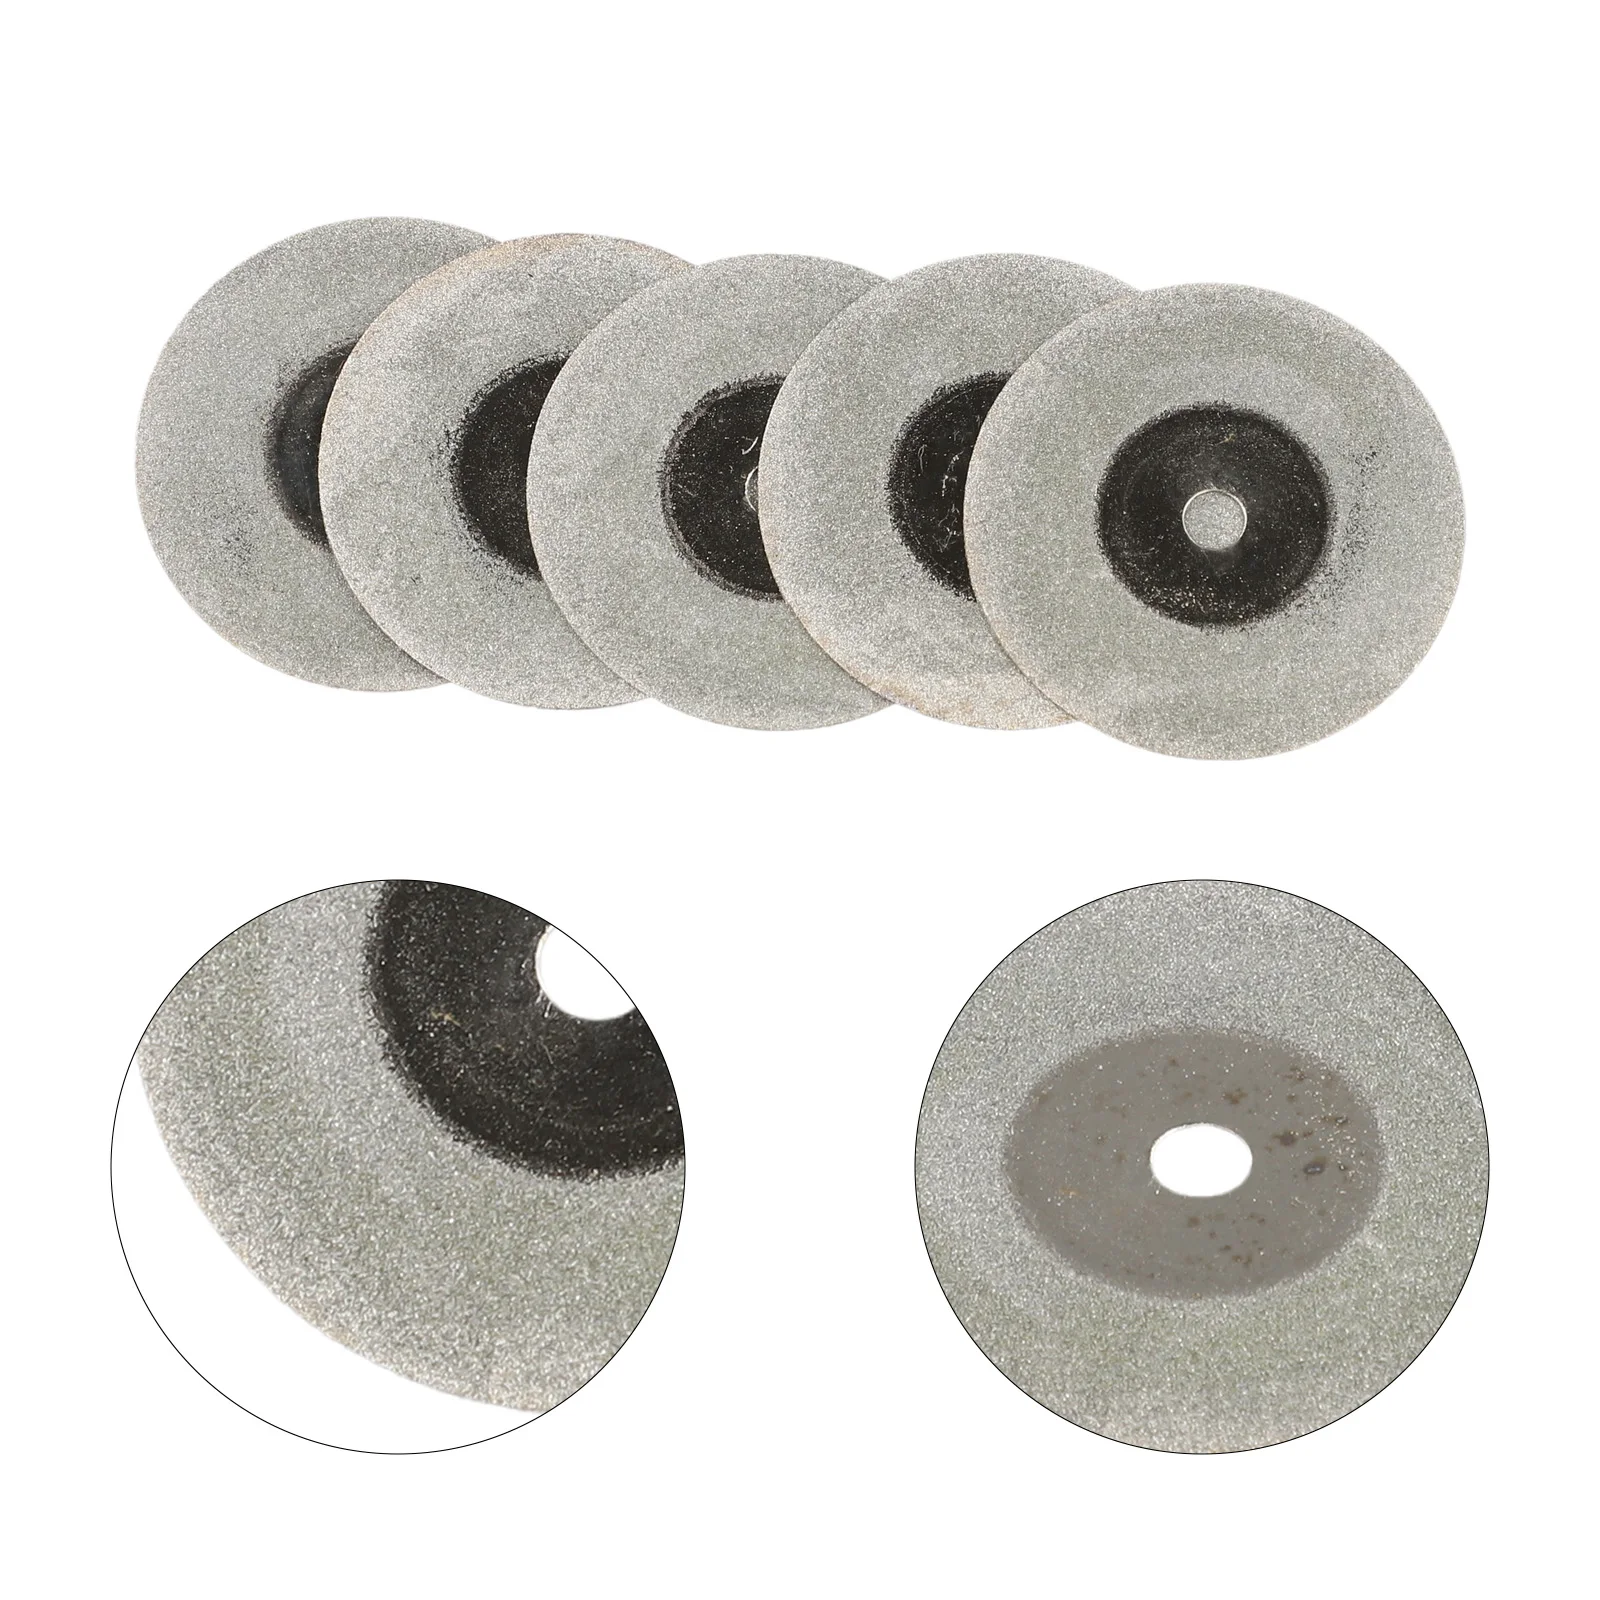 5pcs Cutting Discs 60mm Diamond Saw Blade Cutting Disc Glass Tiles Cutting Blades​ ​power Tools Replacement Accessories kigoauto 5pcs new uncut replacement smart key blade for cadillac cts dts sts xlr emergency uncut hu100 b106 key blade